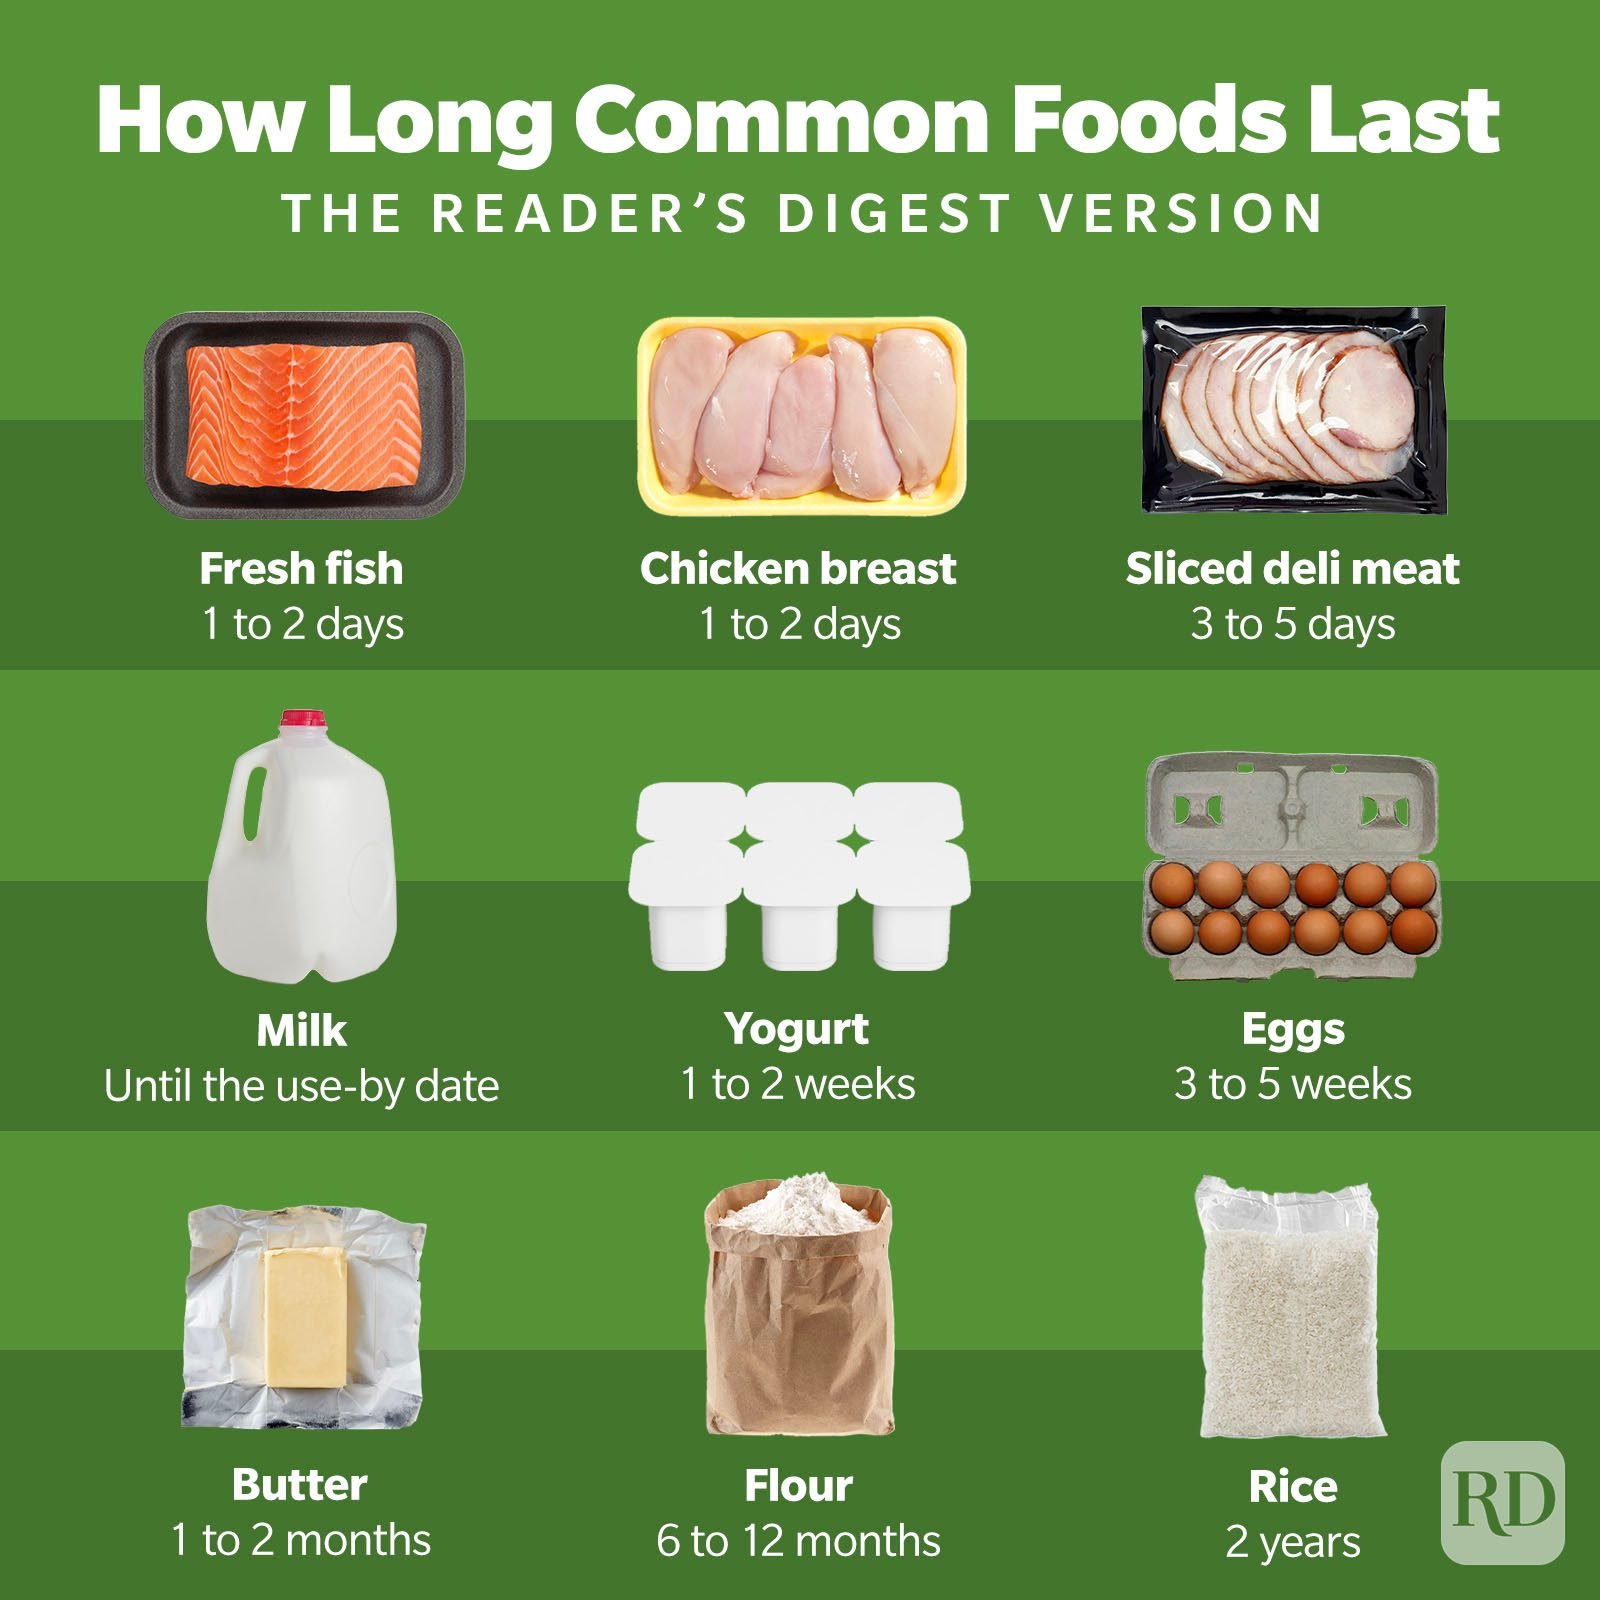 How Long Common Foods Last Infographic Gettyimages9